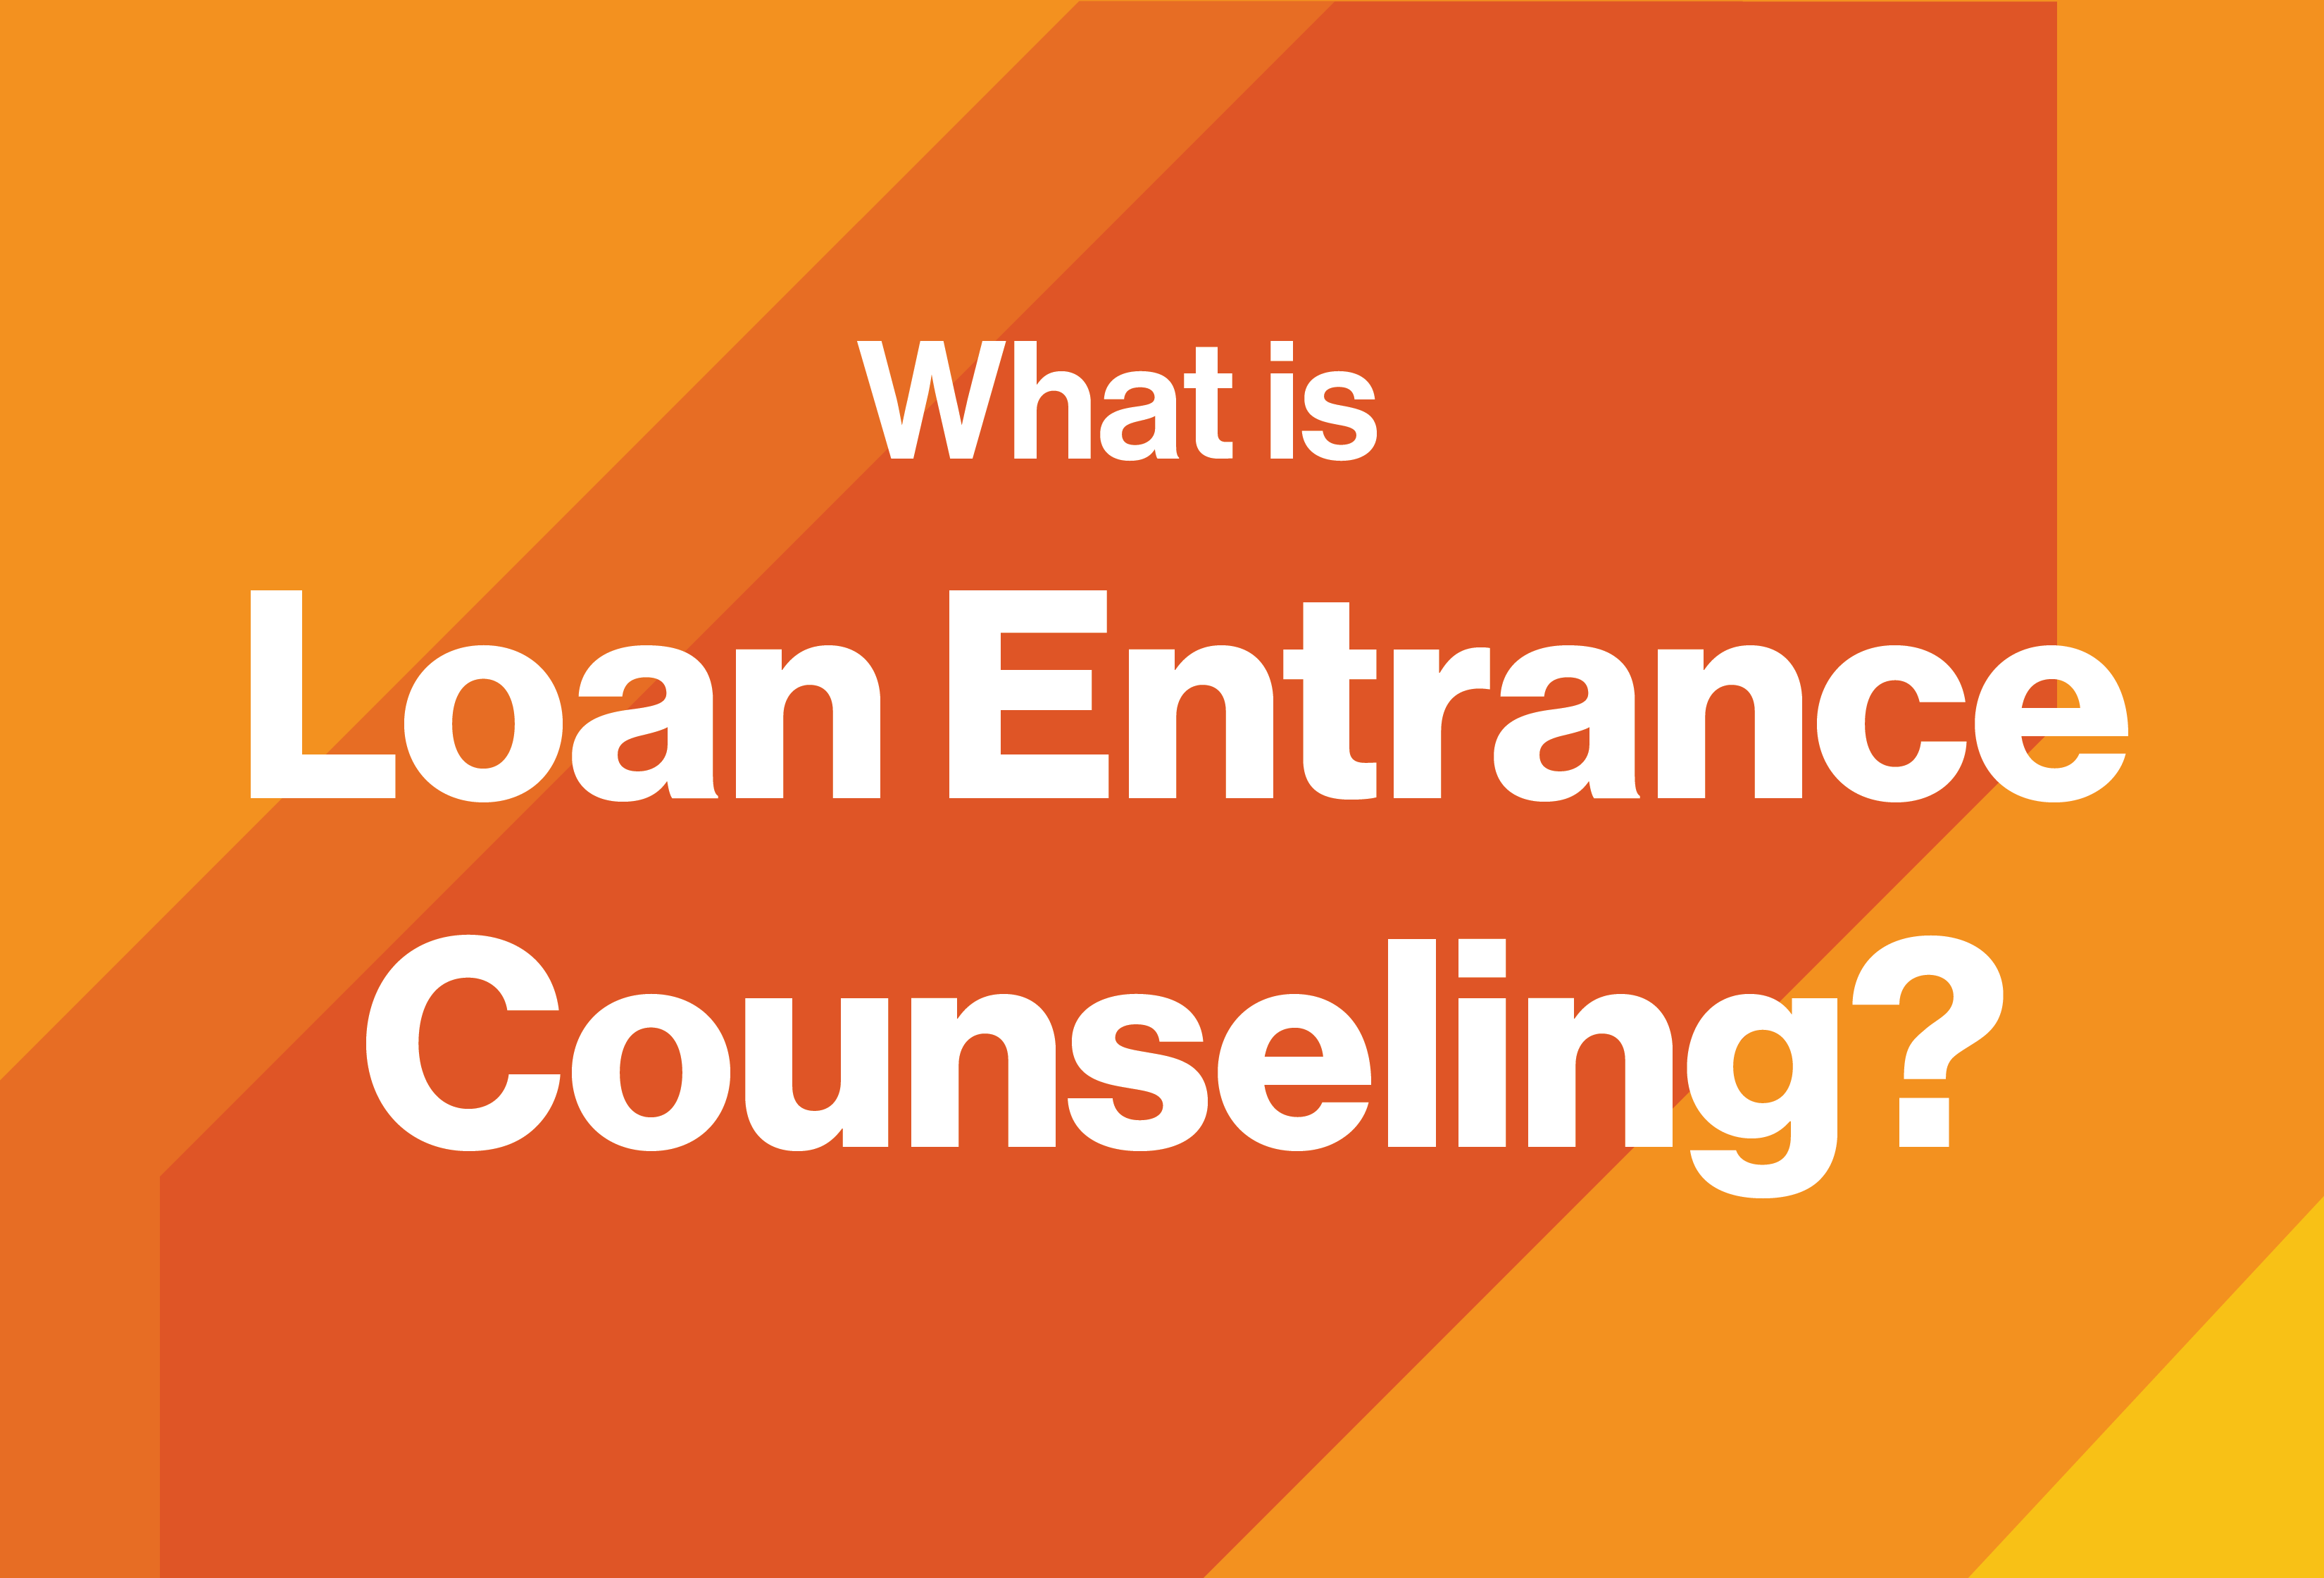 What is Loan Entrance Counseling?